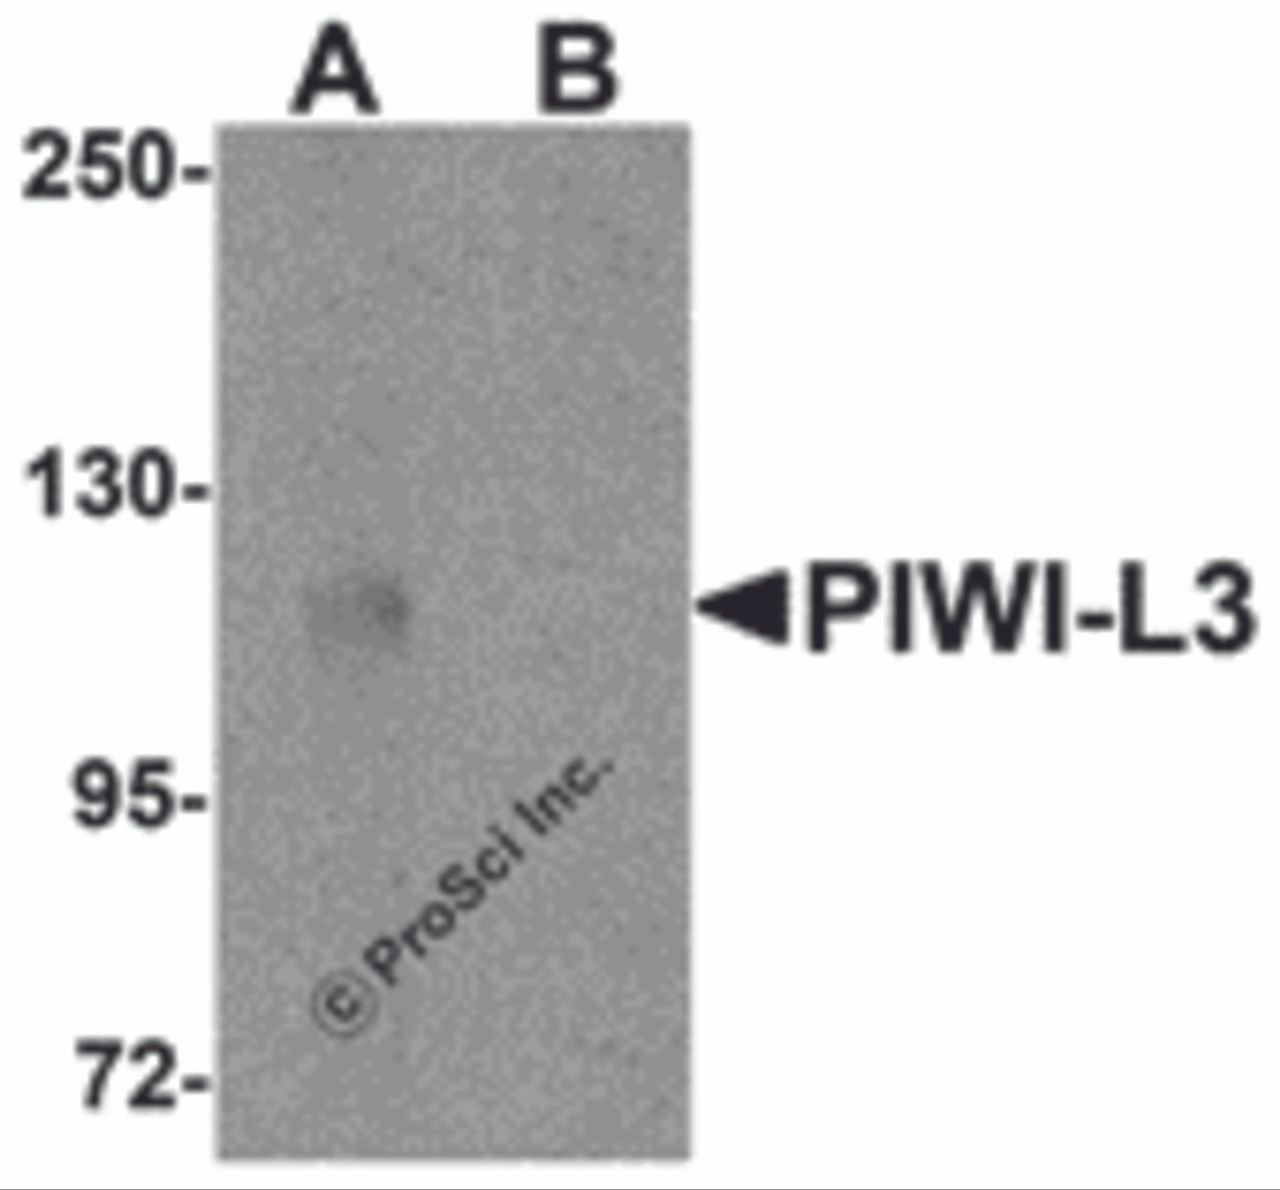 Western blot analysis of PIWI-L3 in 3T3 cell lysate with PIWI-L3 antibody at 1 &#956;g/mL in (A) the absence and (B) the presence of blocking peptide.